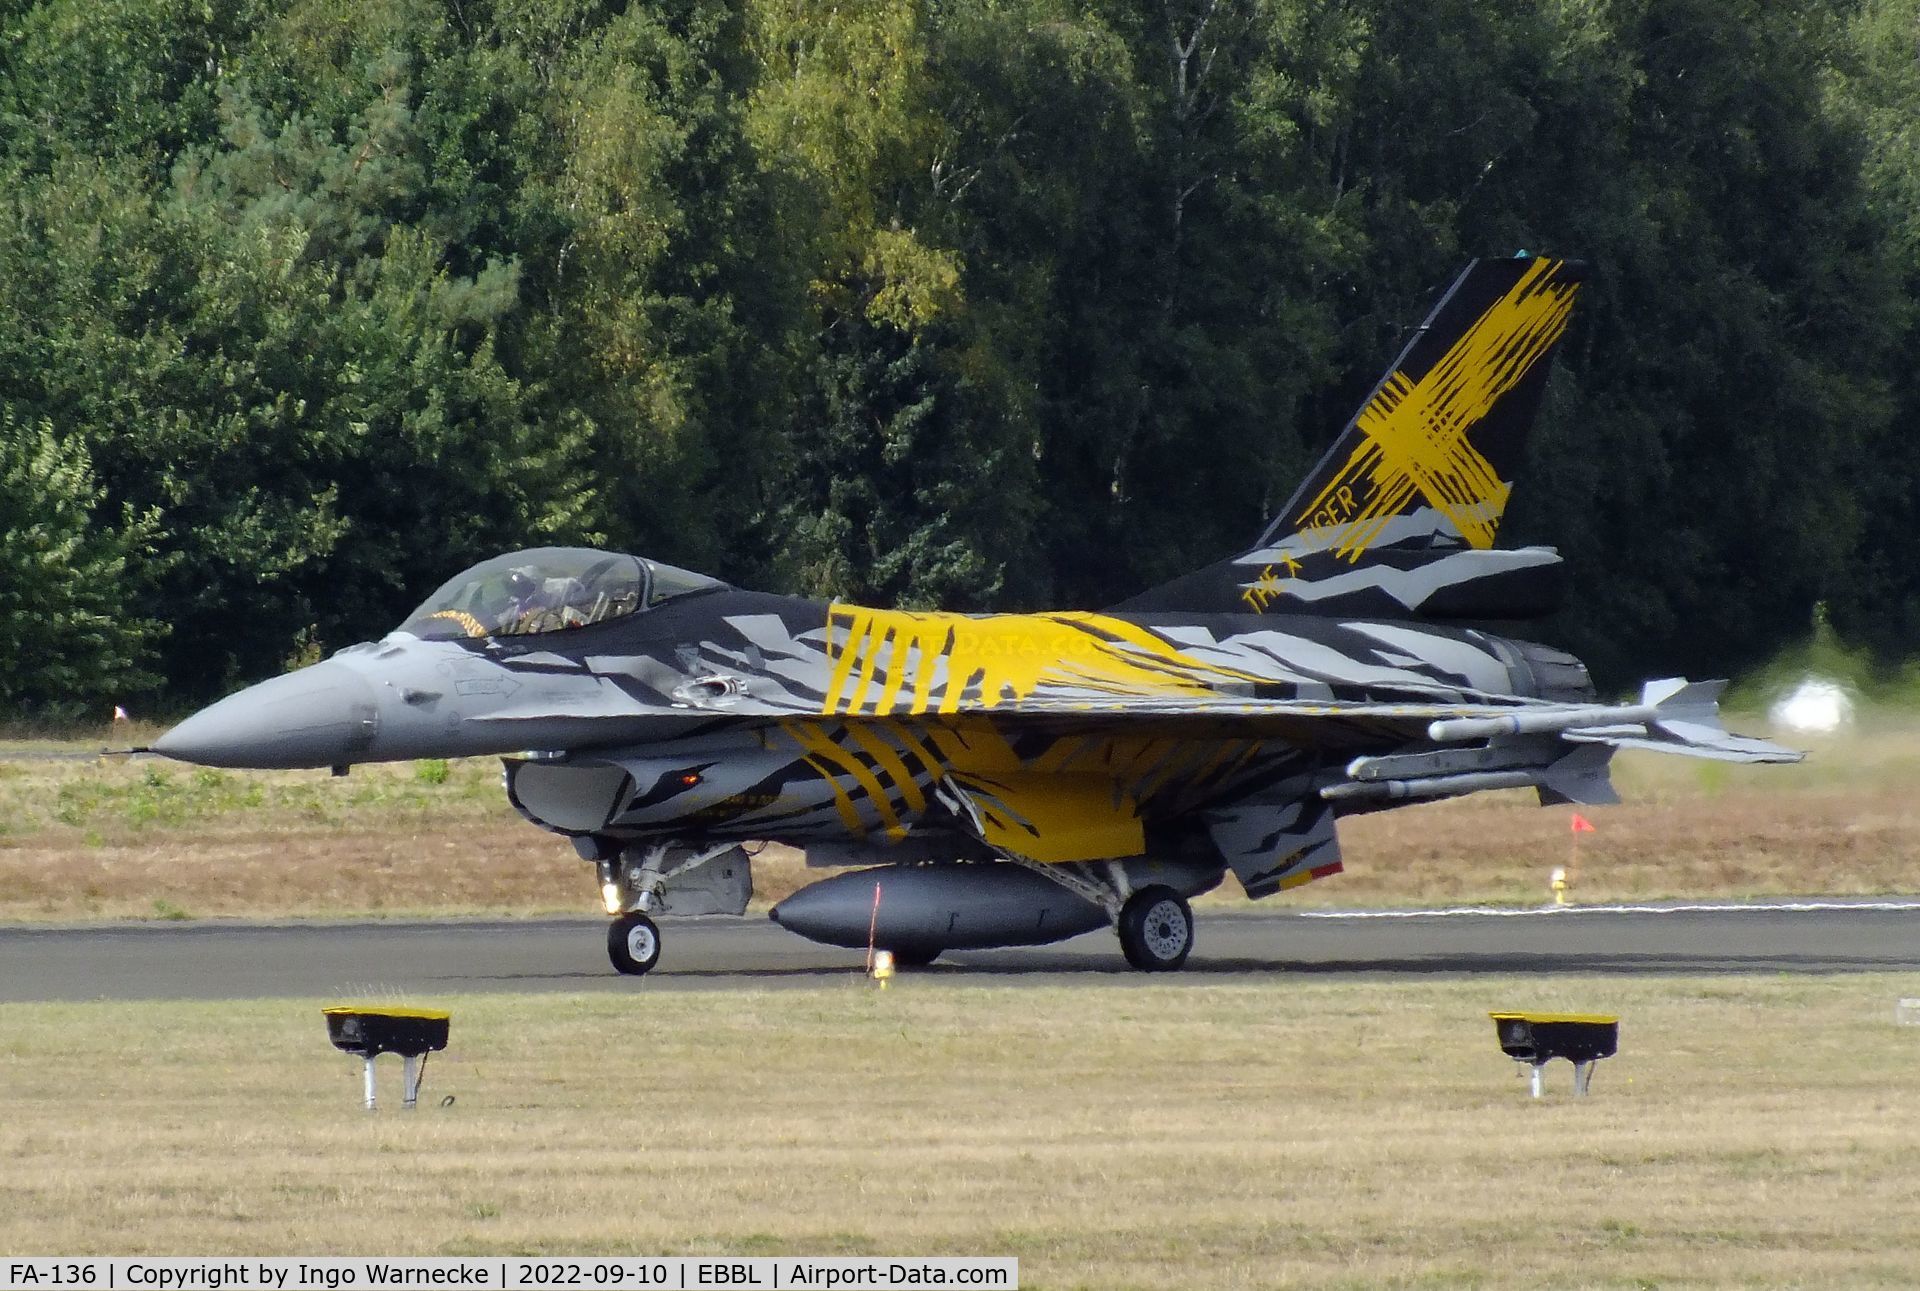 FA-136, SABCA F-16AM Fighting Falcon C/N 6H-136, General Dynamics (SABCA) F-16AM Fighting Falcon of the FAeB (Belgian air force) in 'X-Tiger' special colours at the 2022 Sanicole Spottersday at Kleine Brogel air base